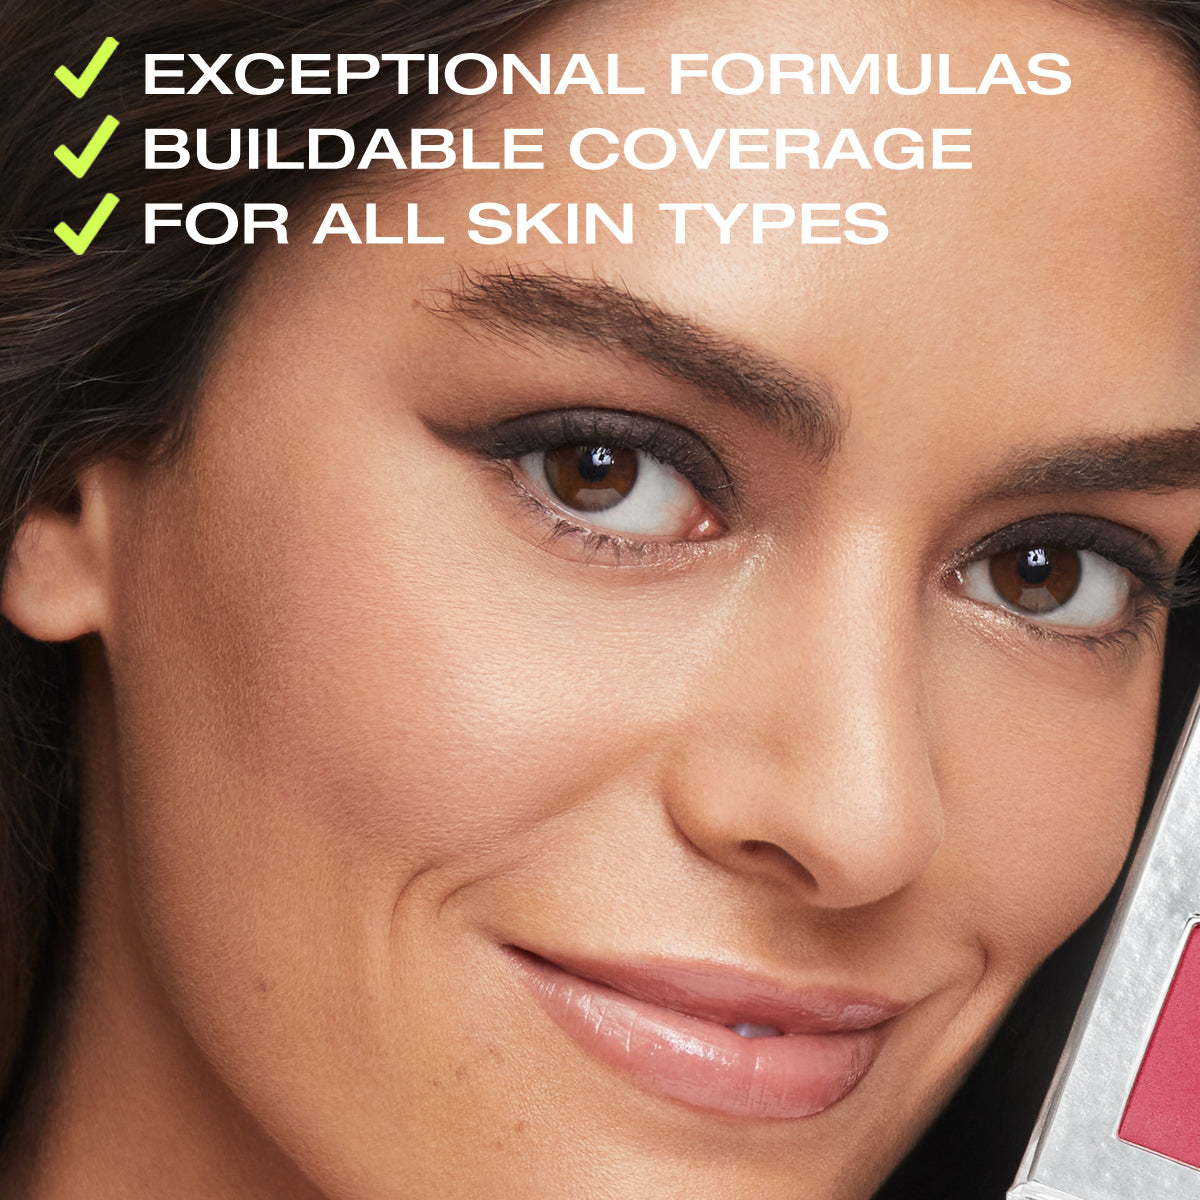 a photo of a beautiful woman with copy on top stating that the coverage in the Fold Out Face is buildable, and the formulas are exceptional & good for all skin types